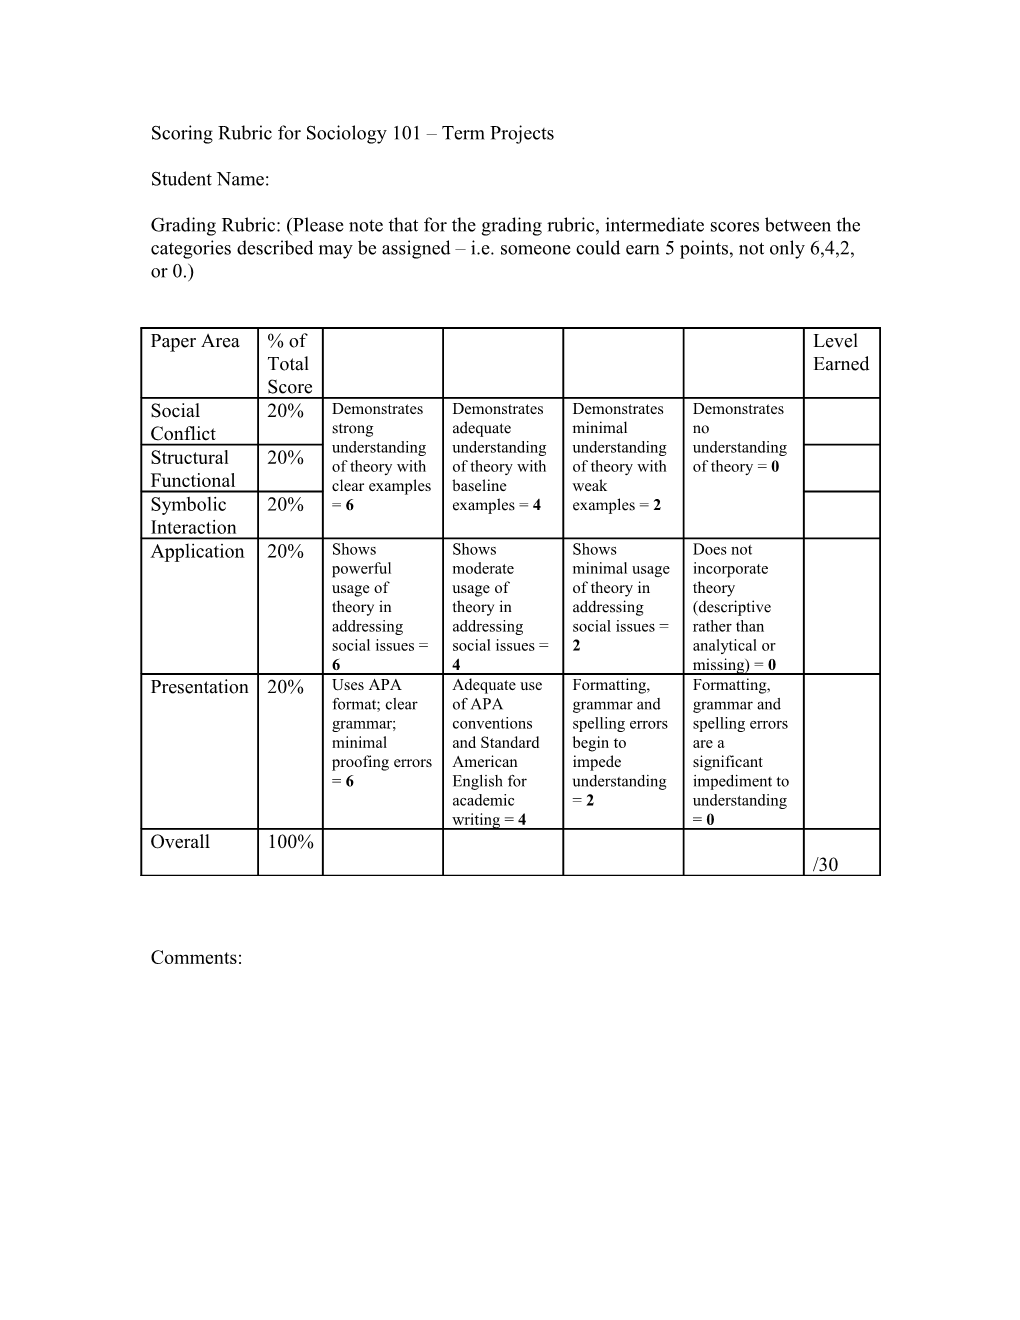 Scoring Rubric for Sociology 101 Term Projects